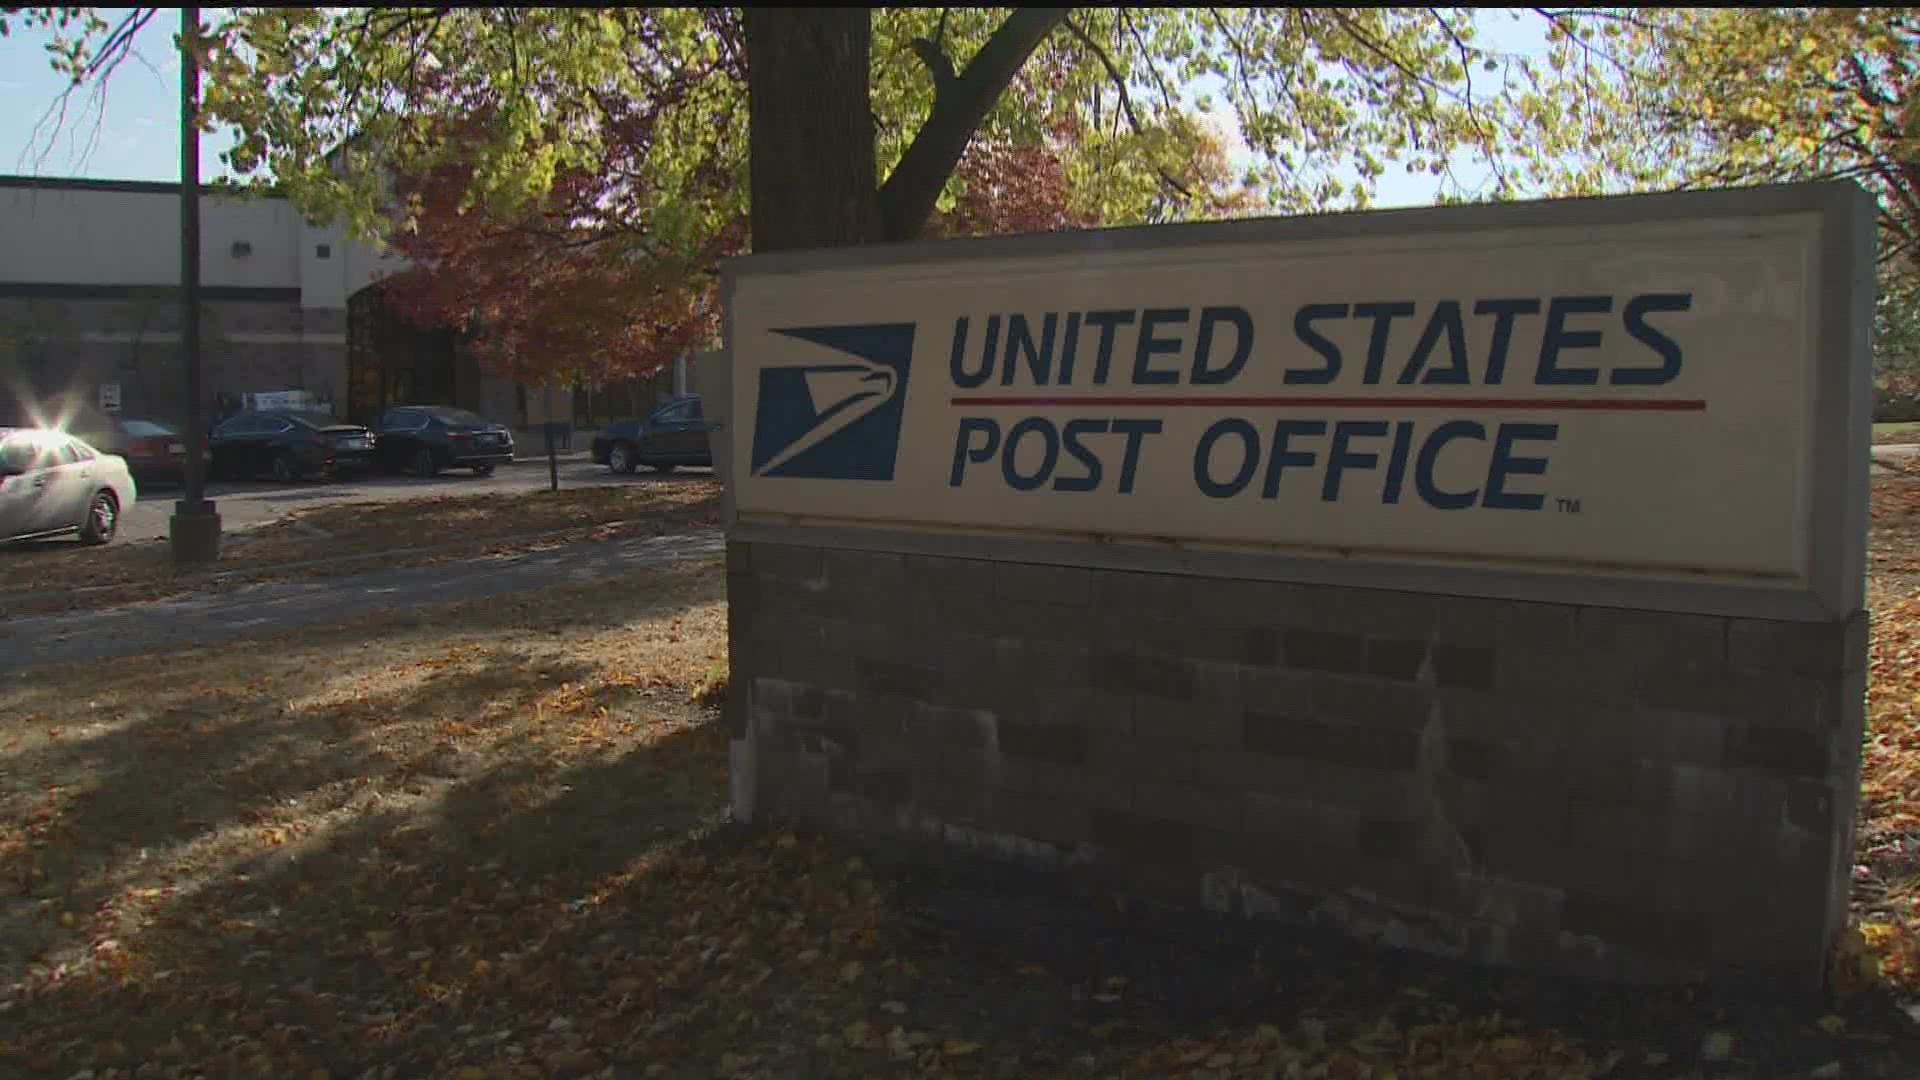 The Postal Service is struggling to keep up with rising gas and labor costs due to inflation.